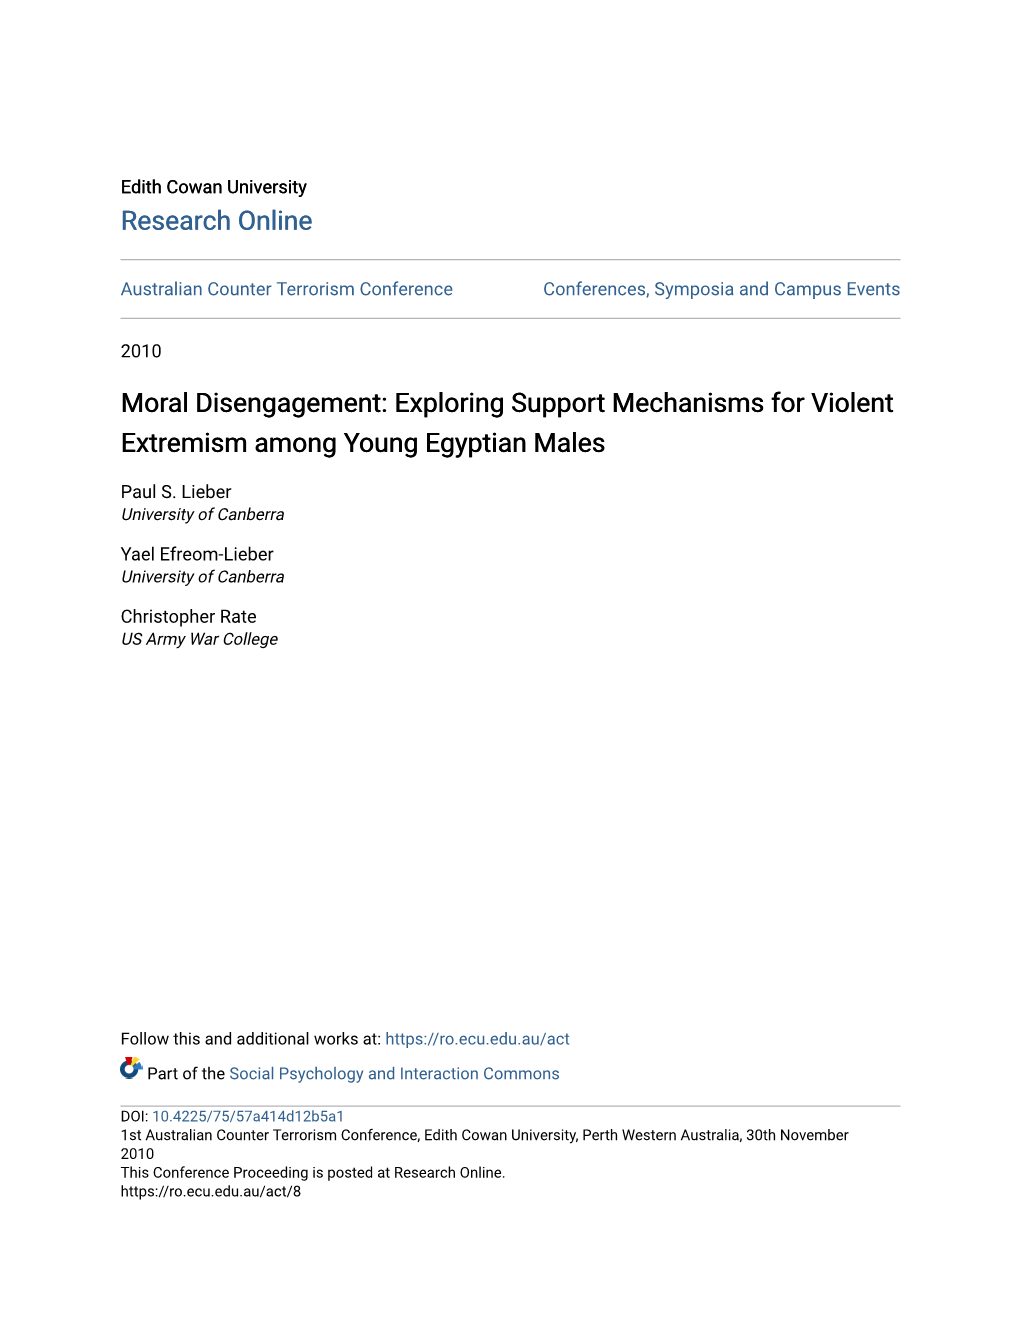 Moral Disengagement: Exploring Support Mechanisms for Violent Extremism Among Young Egyptian Males